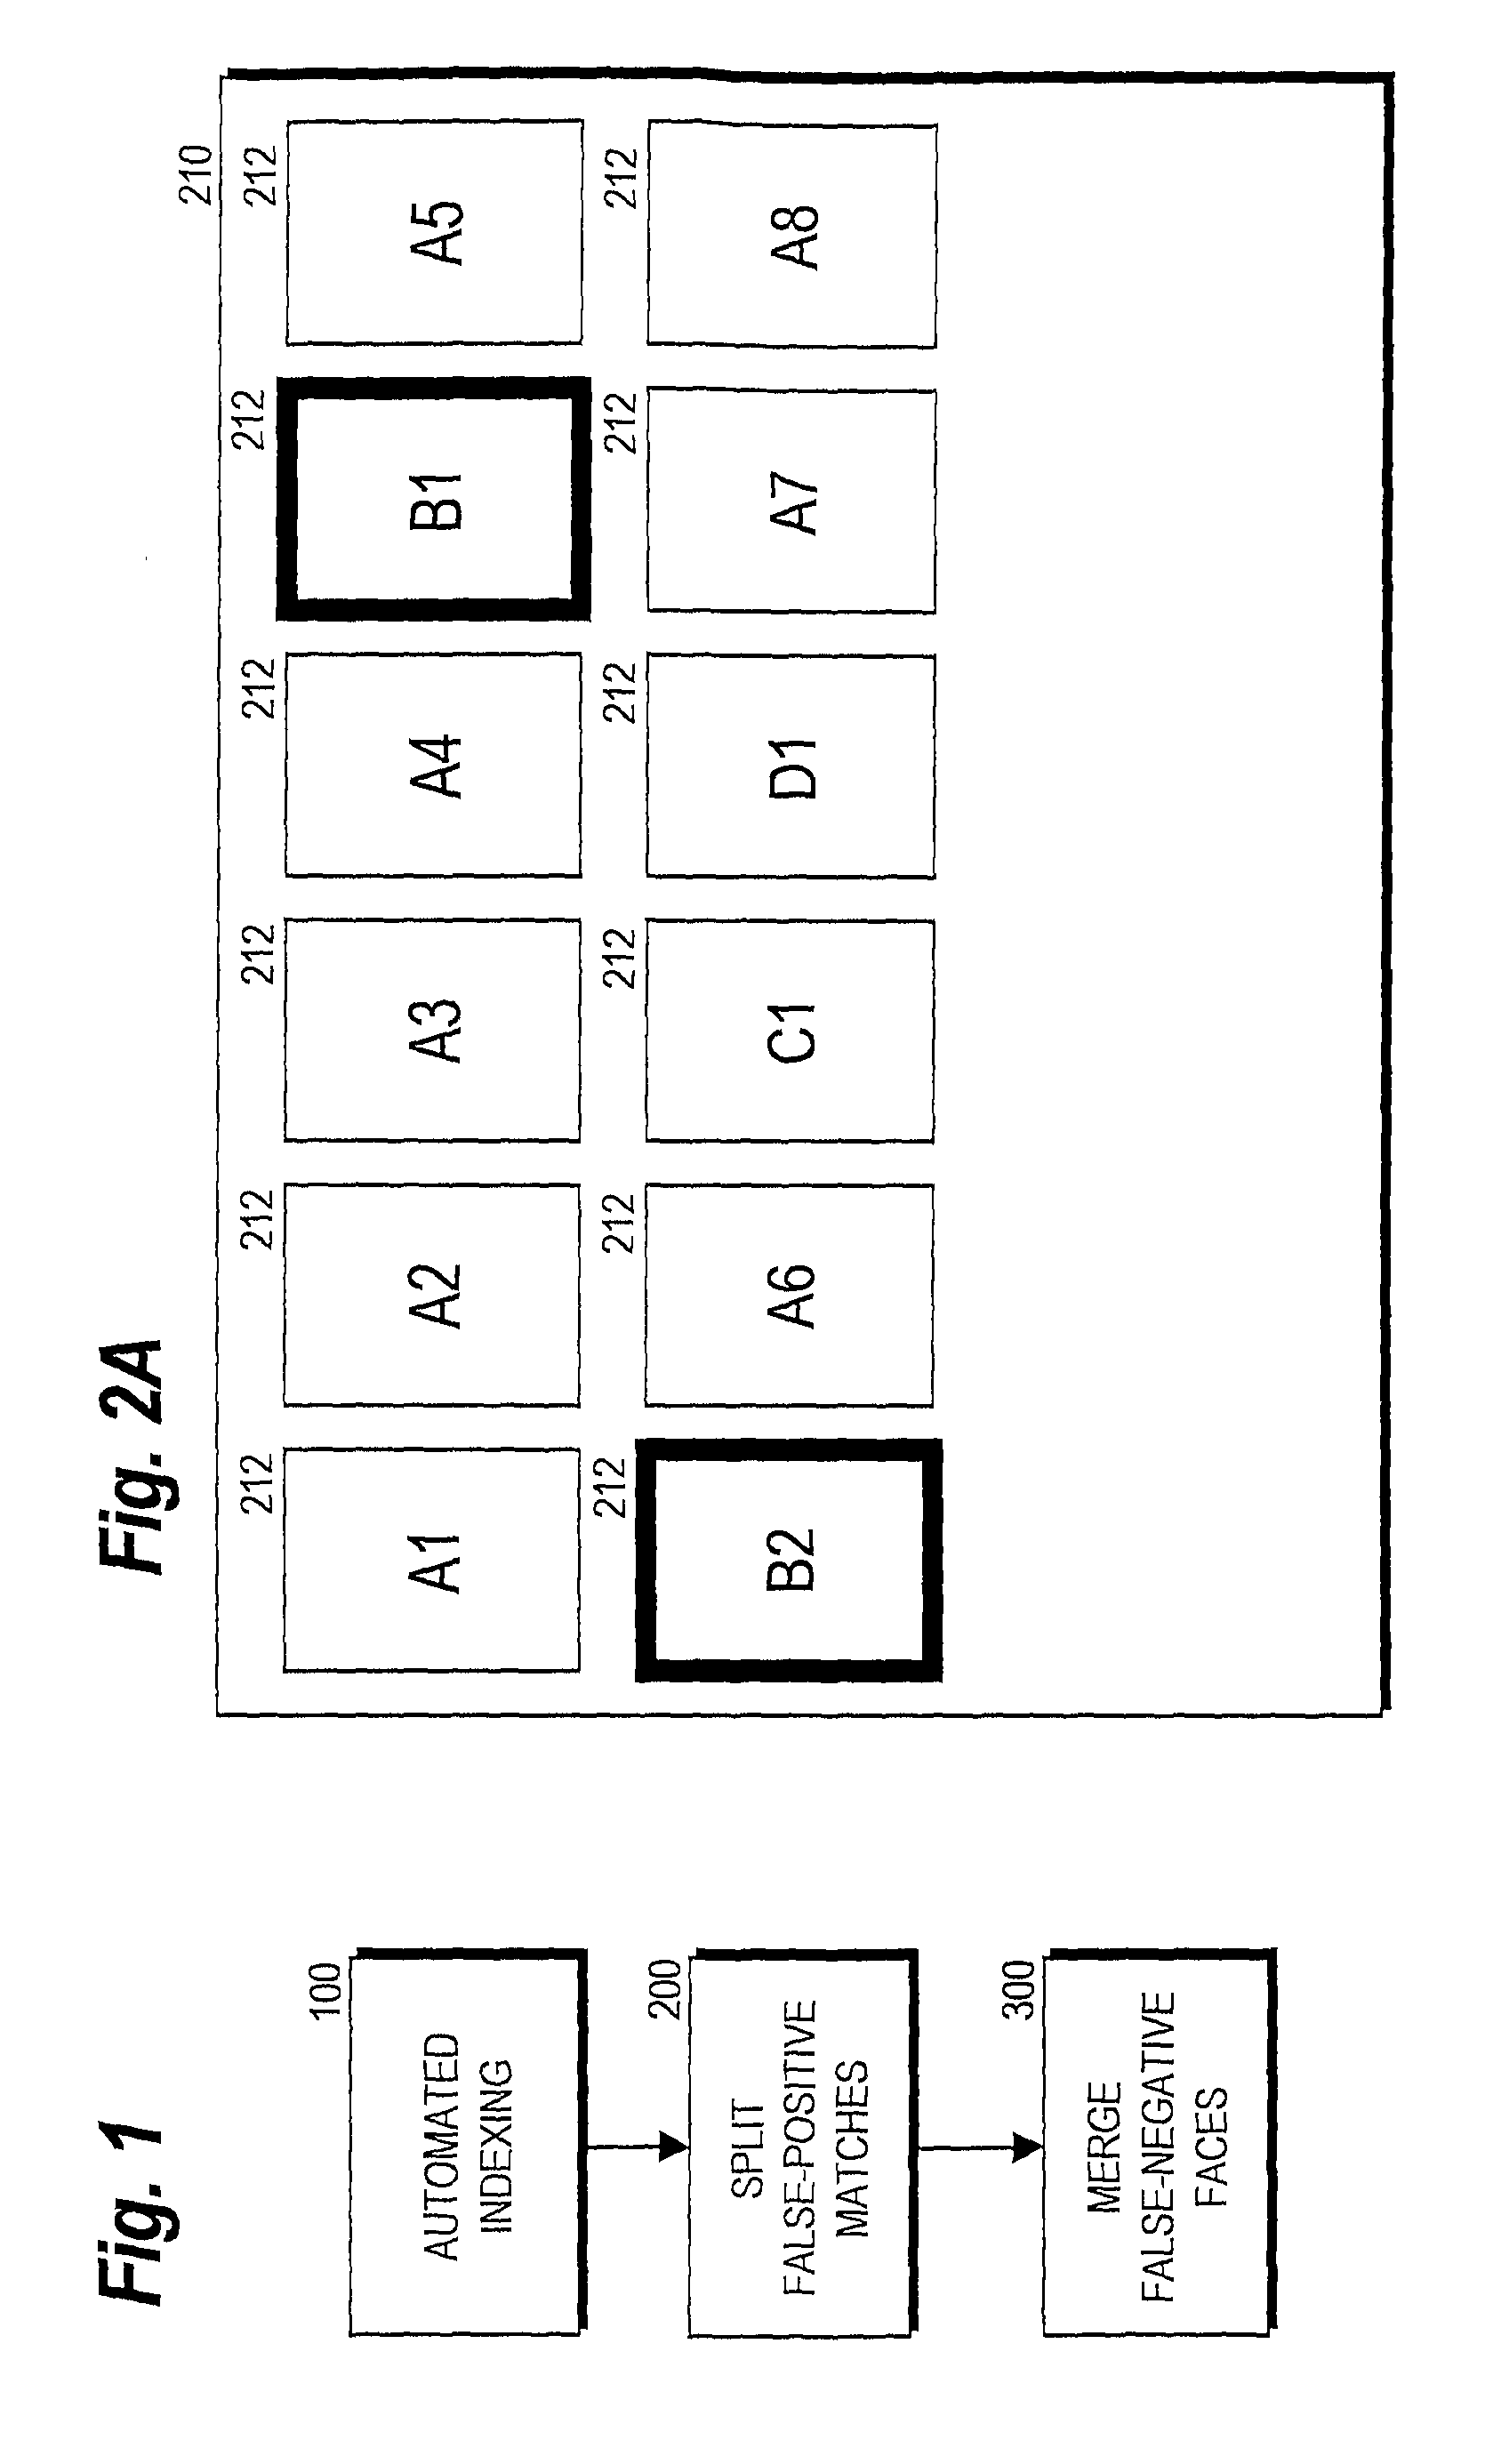 Manually-assisted automated indexing of images using facial recognition